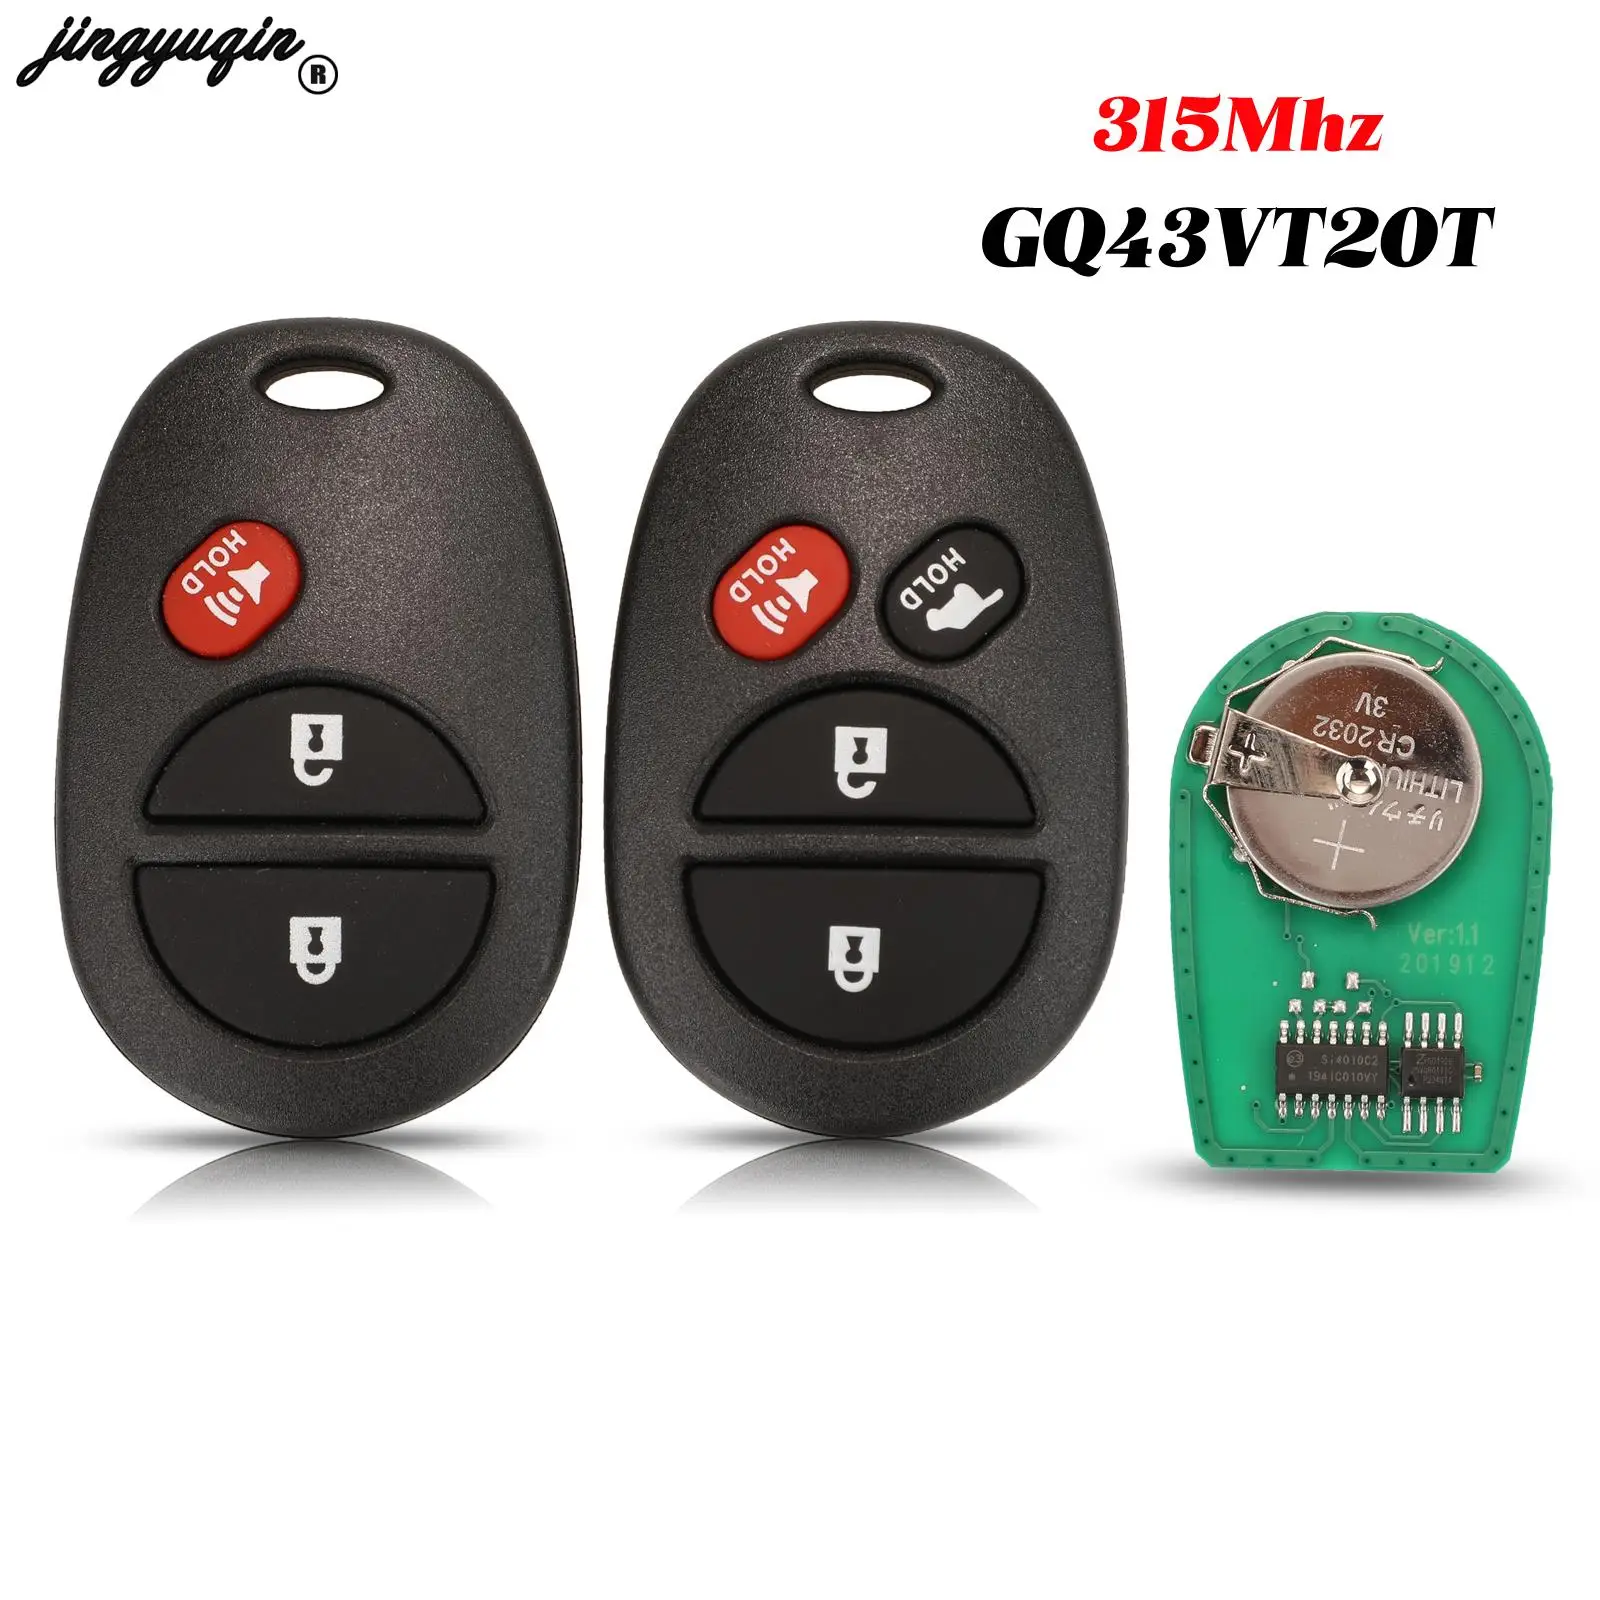 jingyuqin 3/4 Buttons For Toyota Tacoma Tundra Highlander Sequoia Sienna 2008-2012 Smart Remote Car Key 315Mhz FOB GQ43VT20T